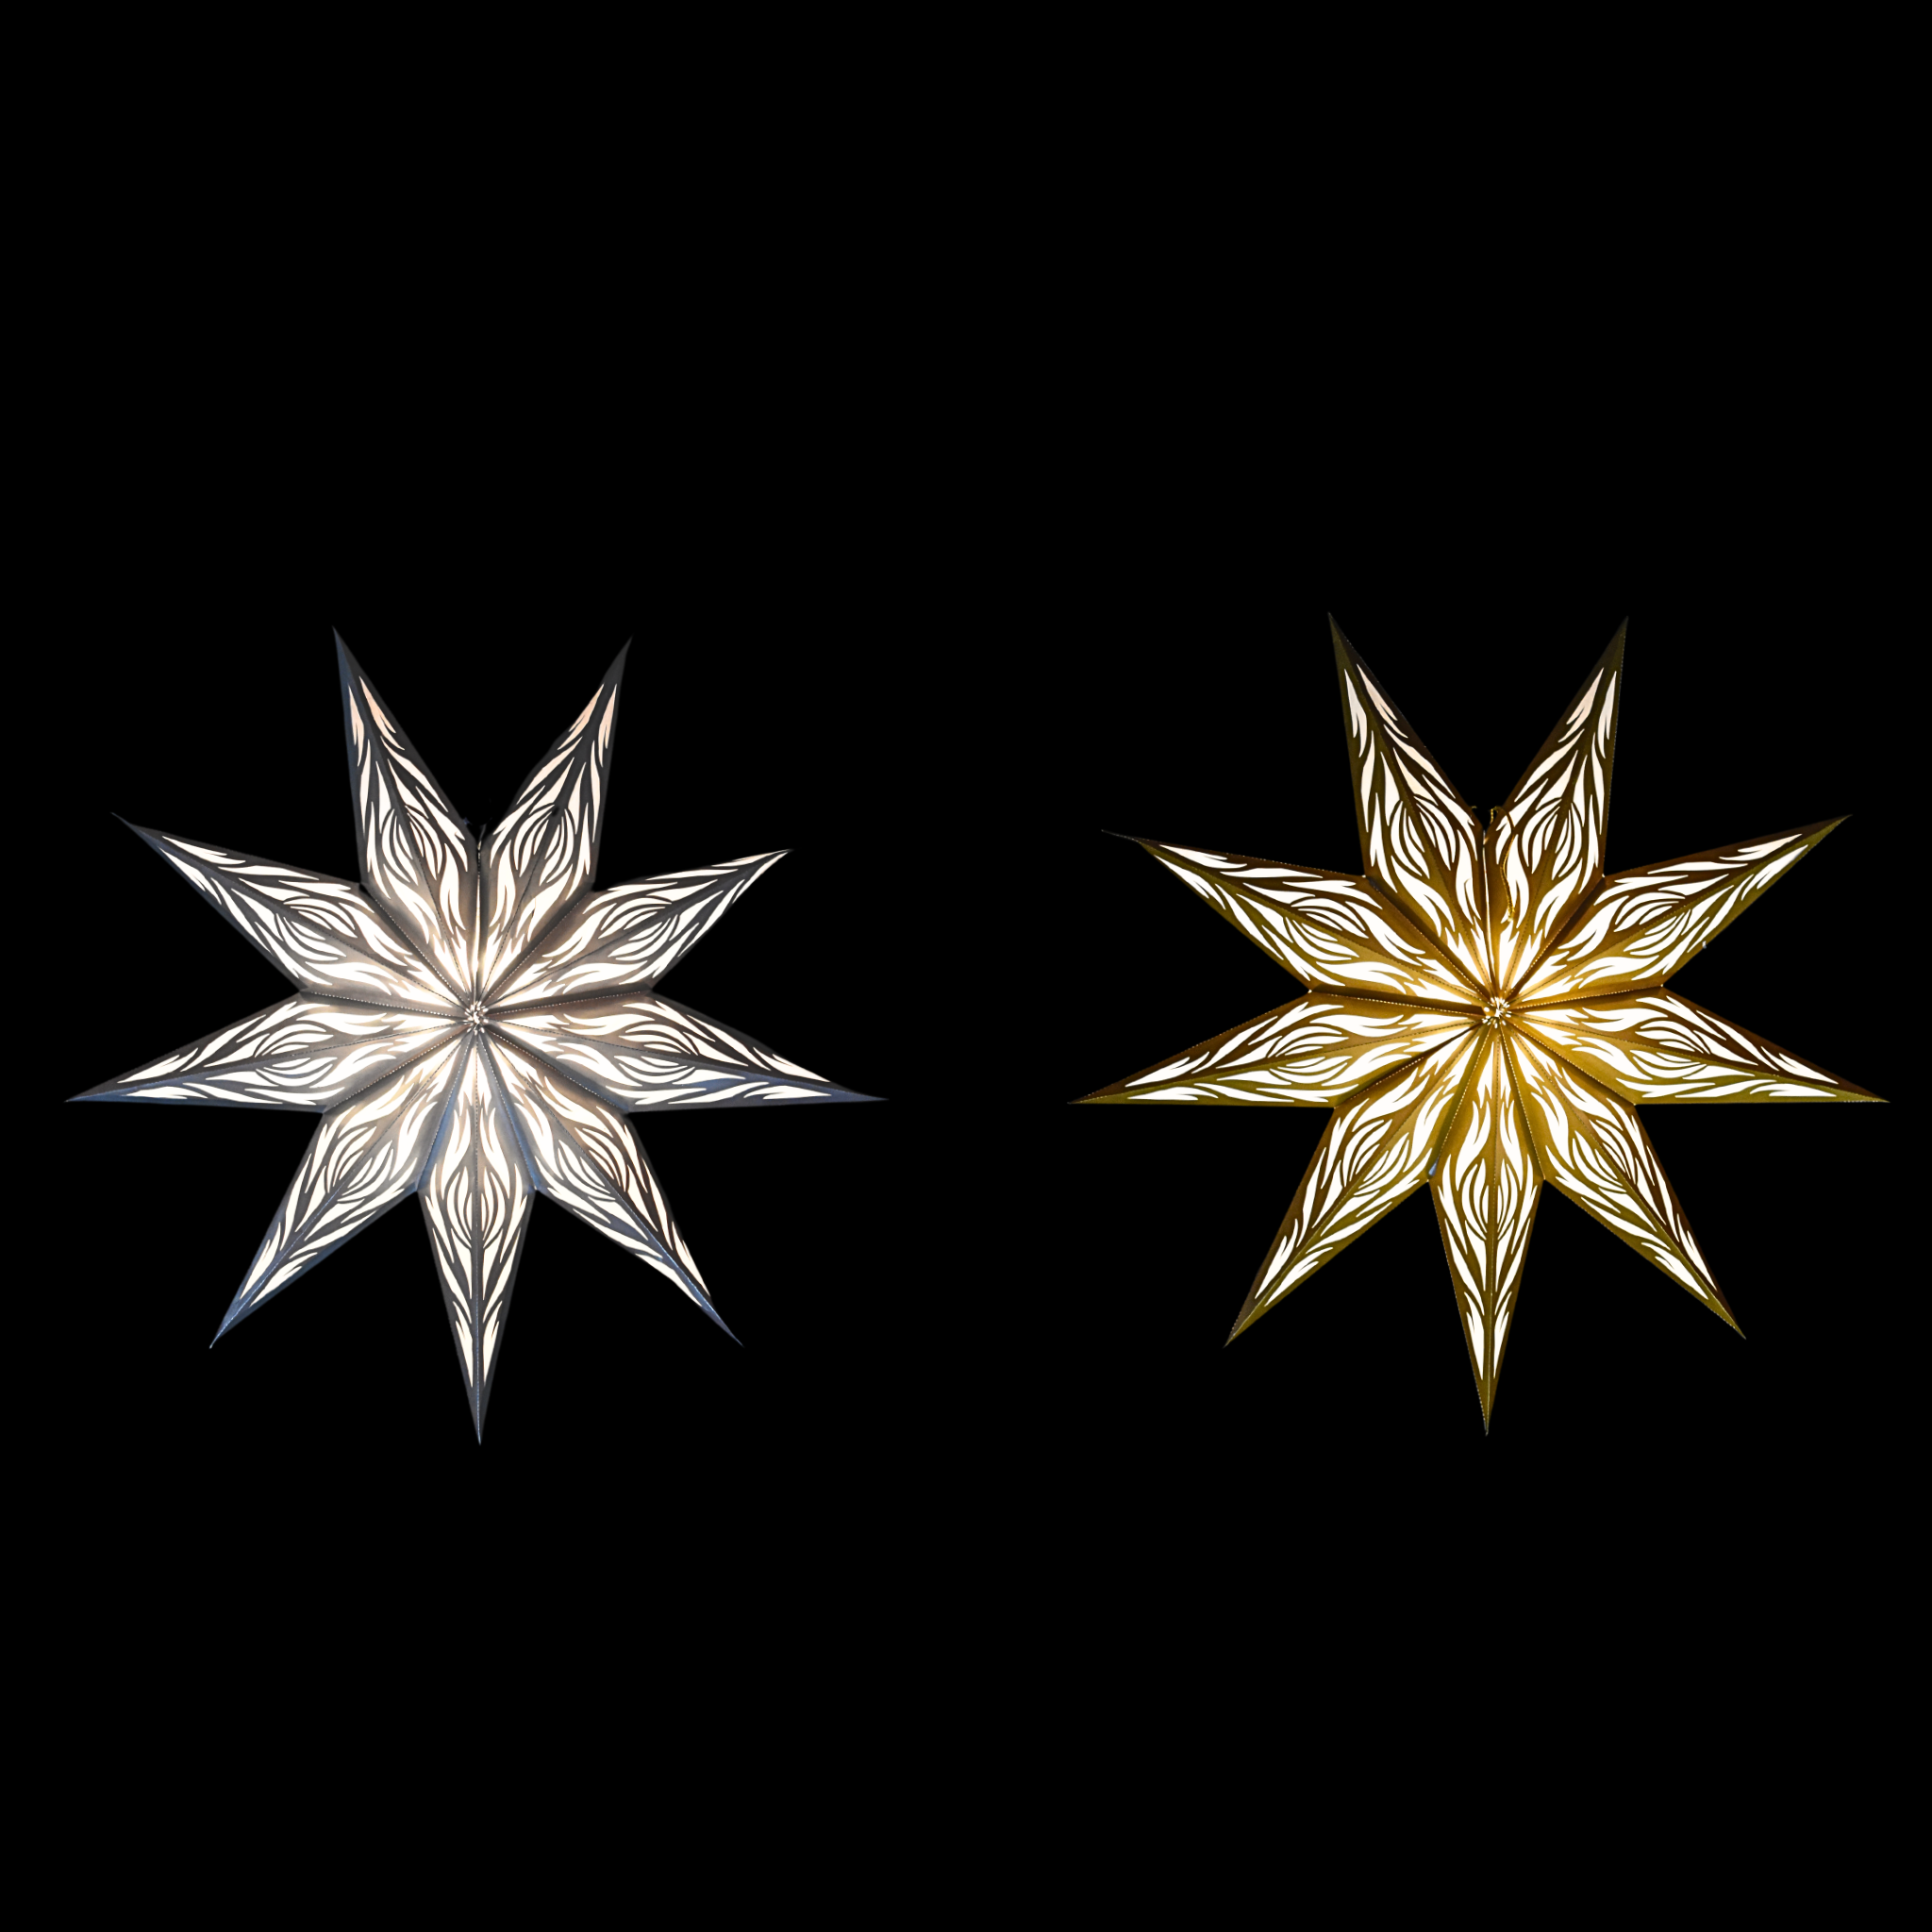 Combo of Two Christmas Paper Star Lanterns (Silver and Gold)